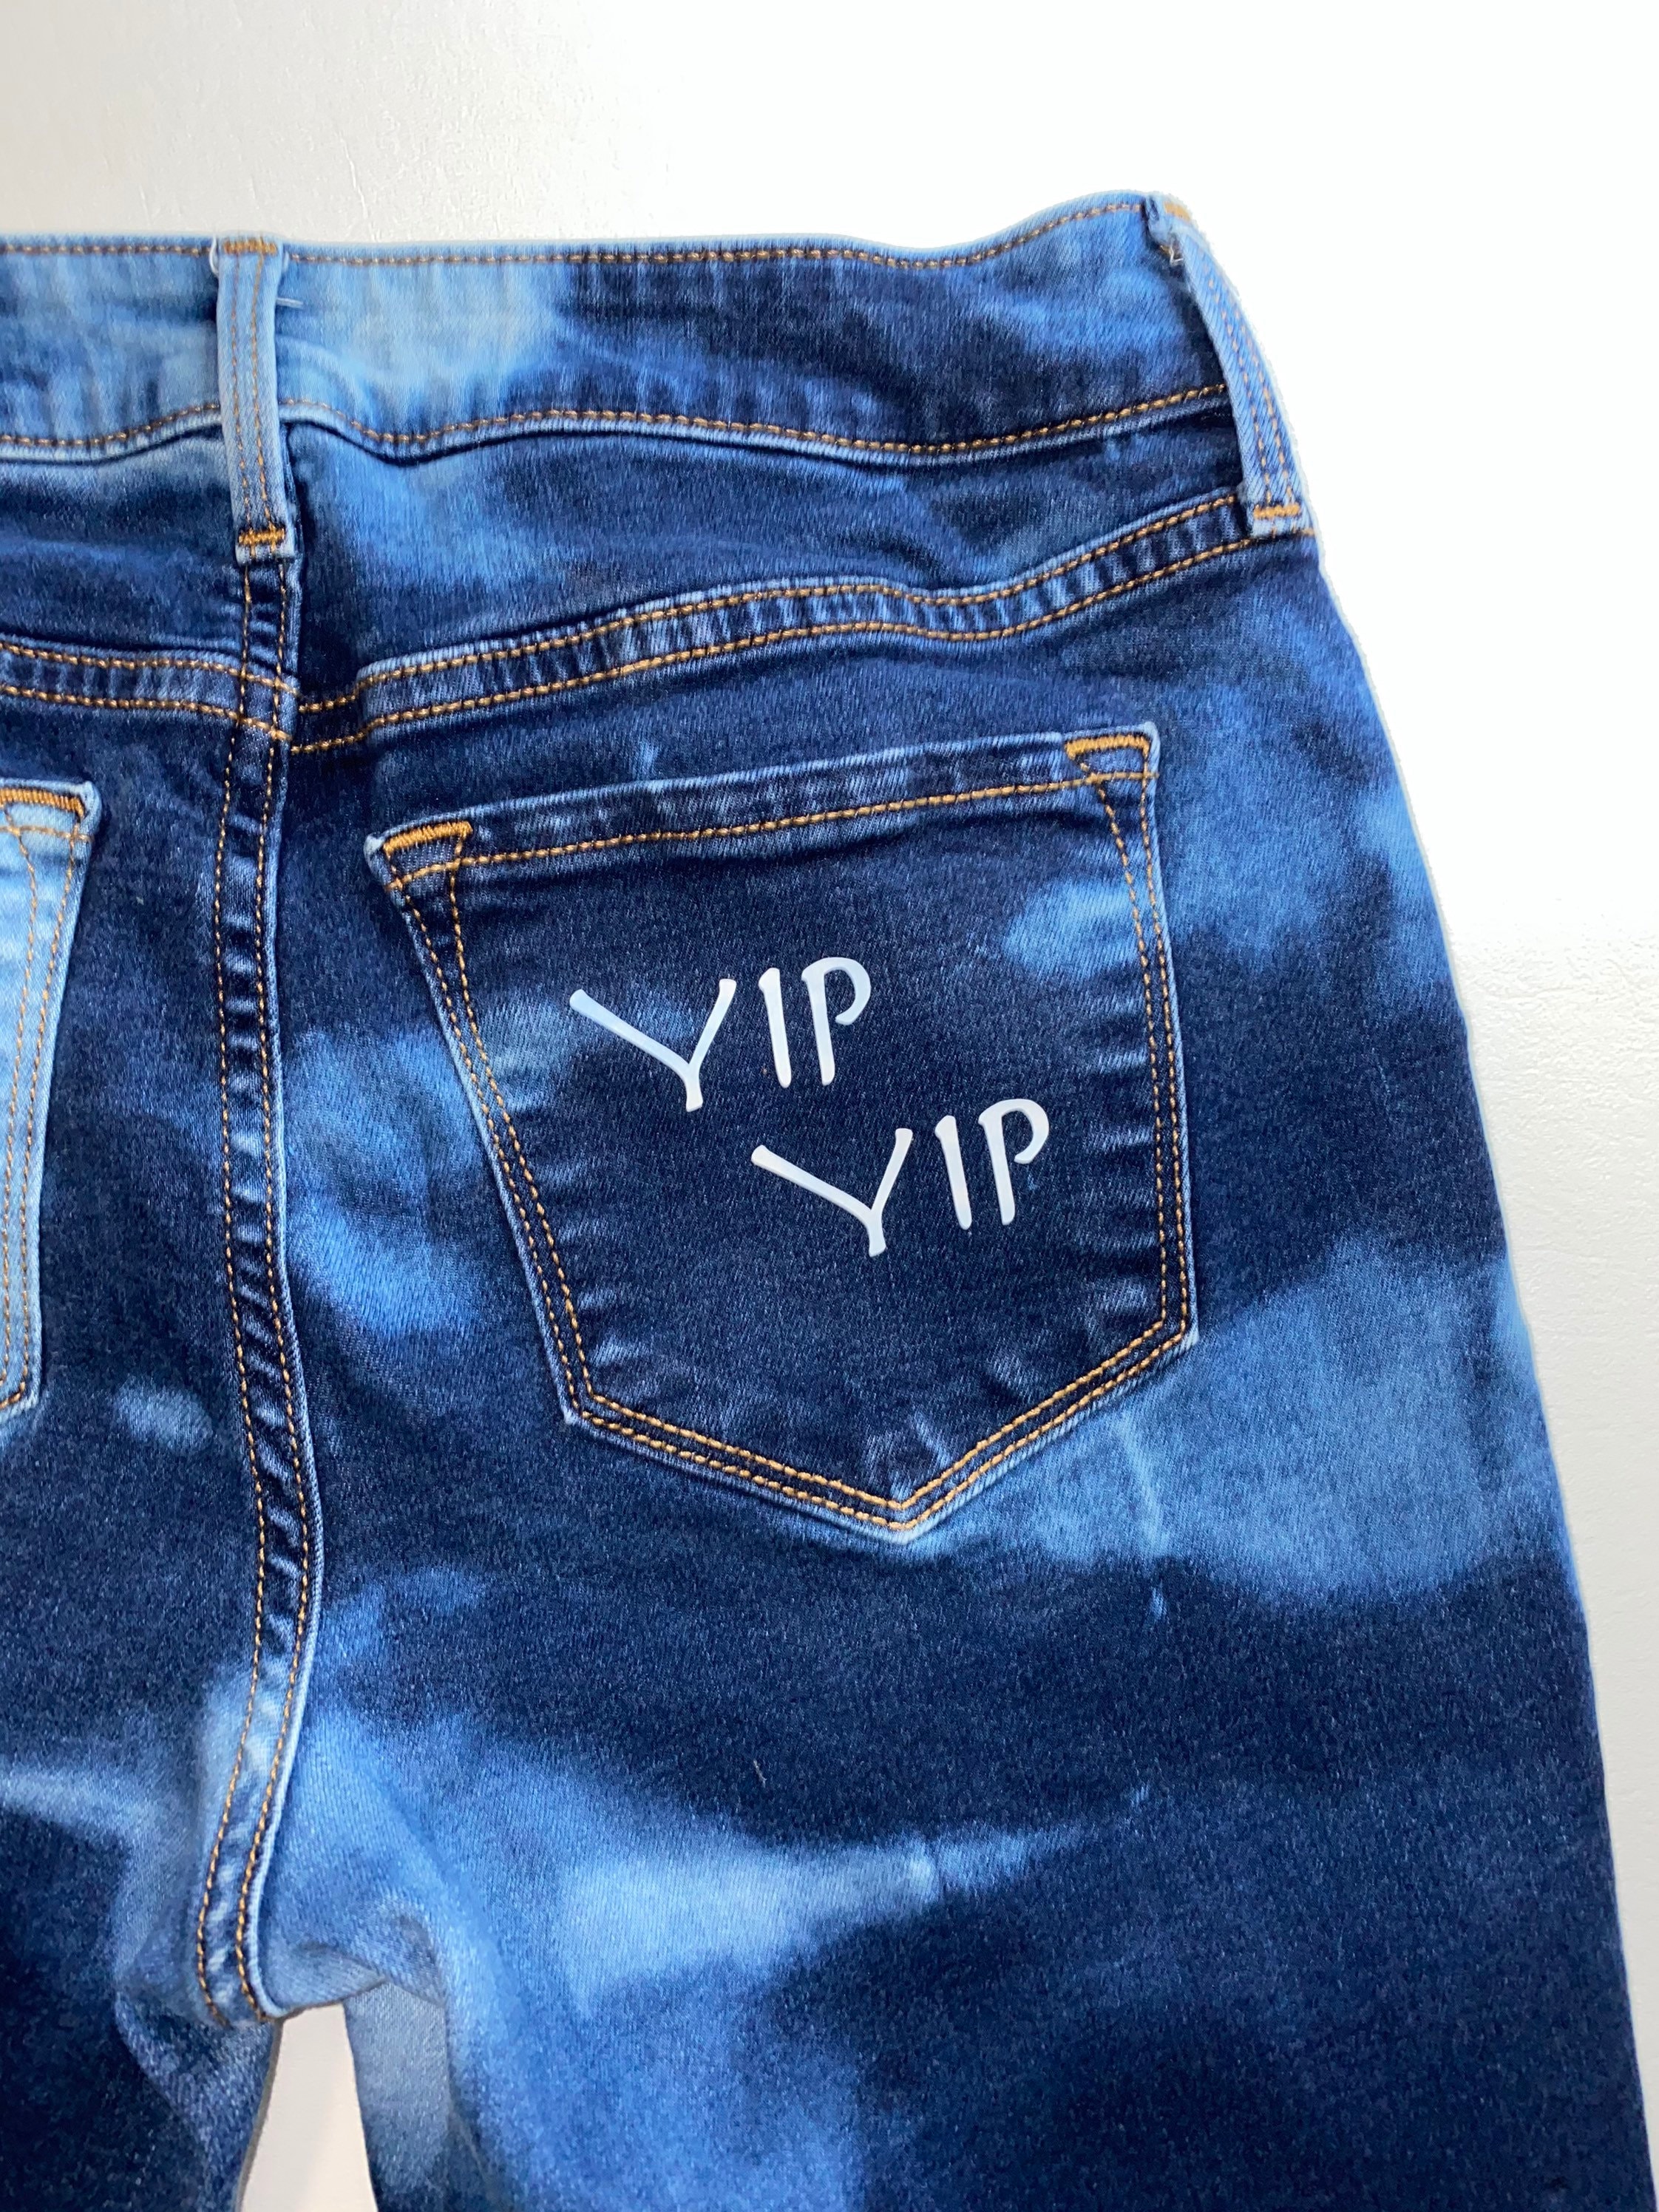 APPA Pants Avatar the Last Airbender Jeans Appa Jeans - Etsy